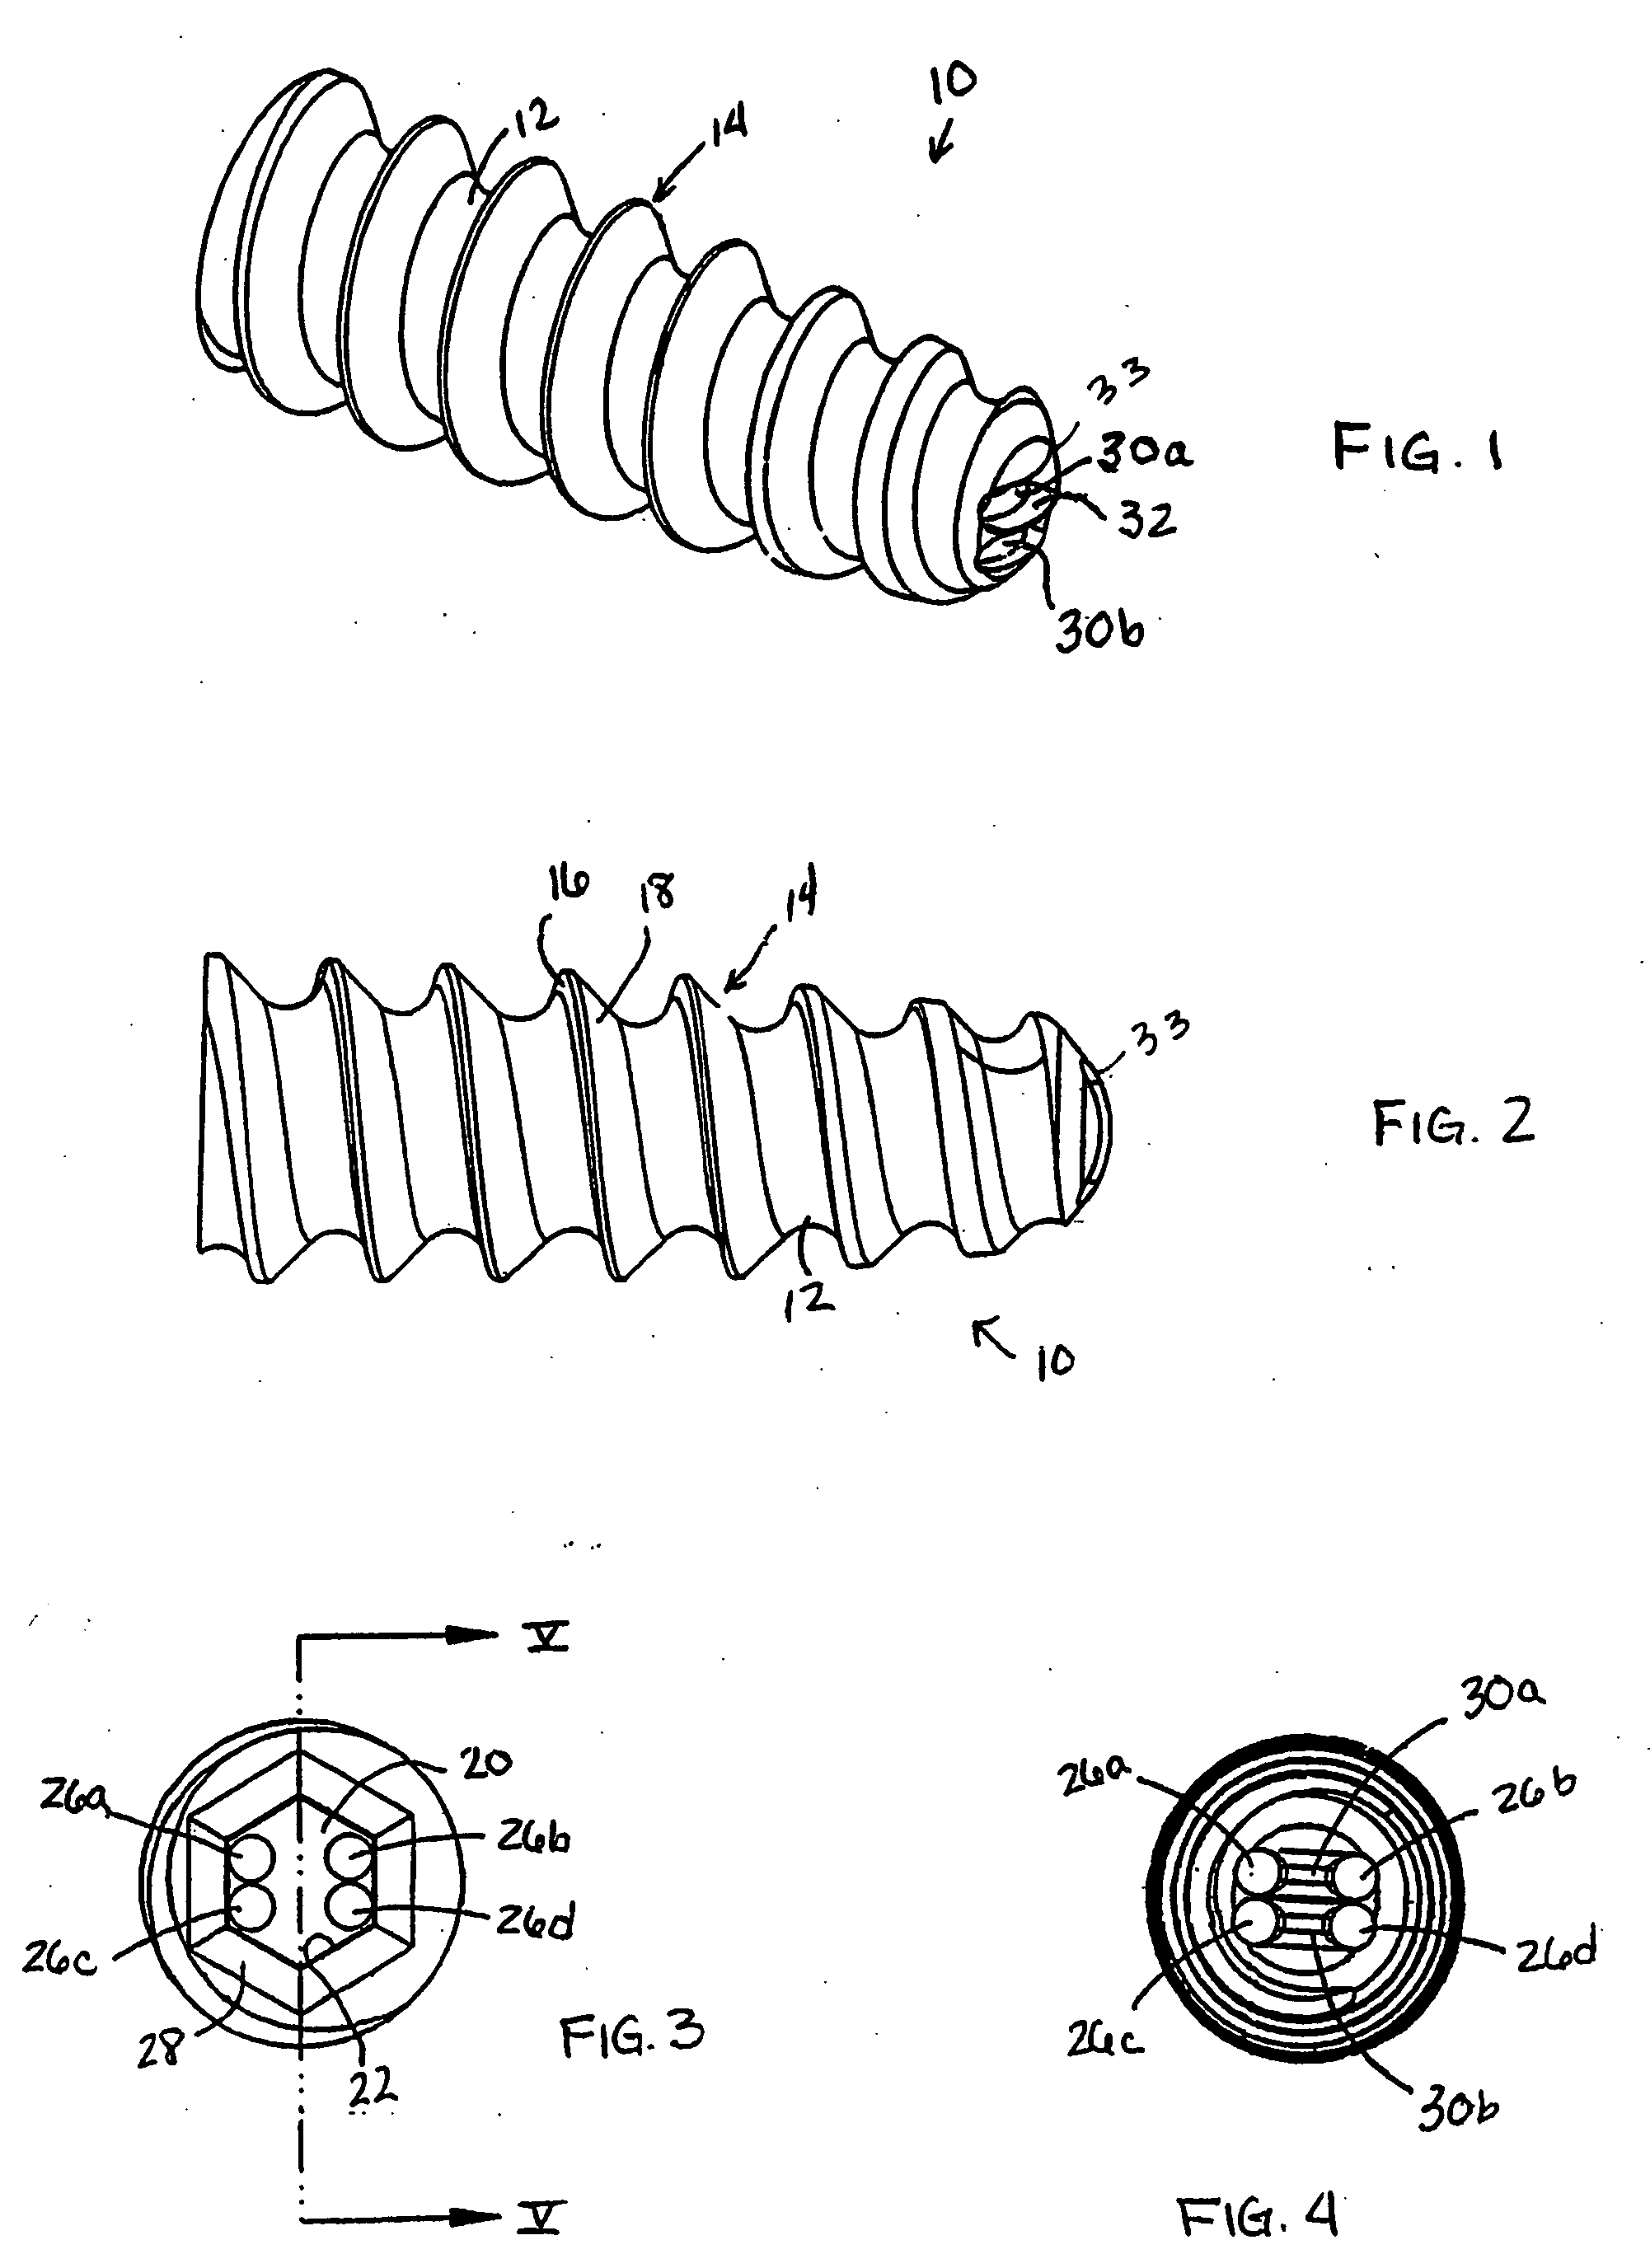 Suture anchor with apertures at tip